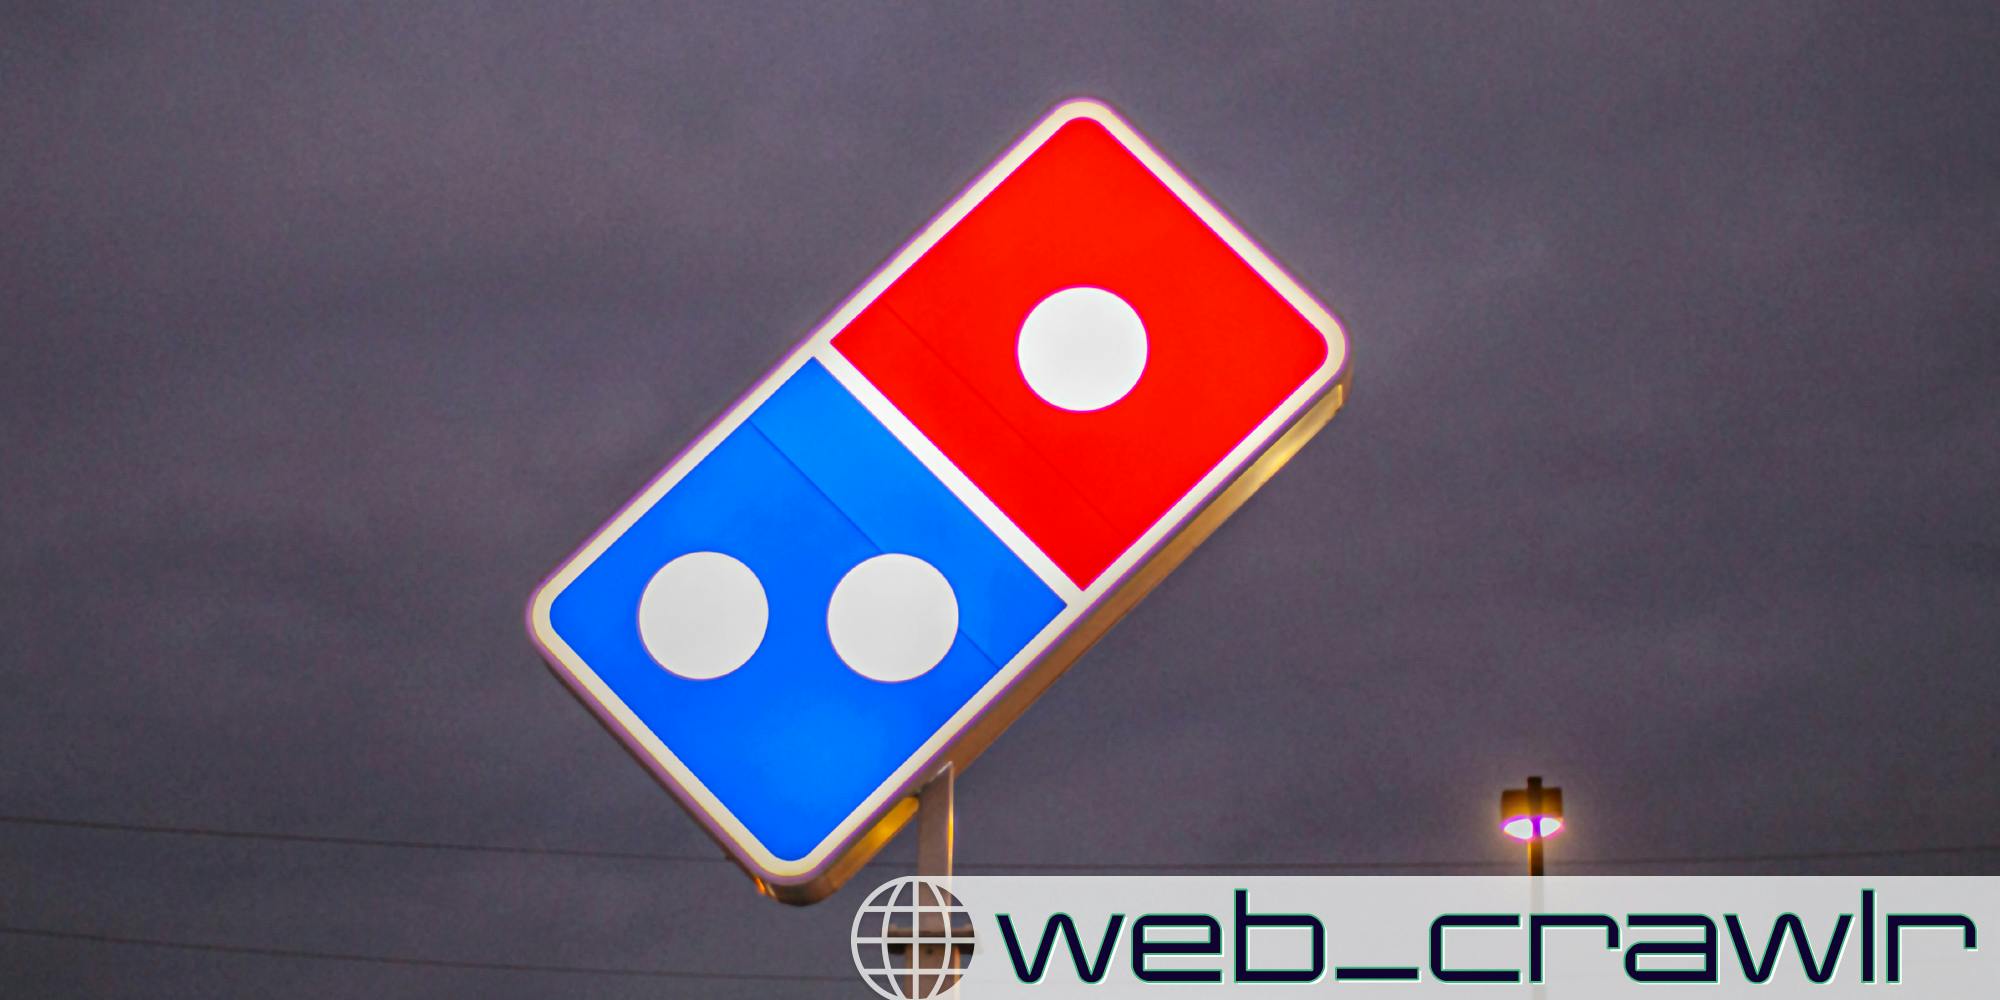 A Domino's Pizza sign. The Daily Dot newsletter web_crawlr logo is in the bottom right corner.